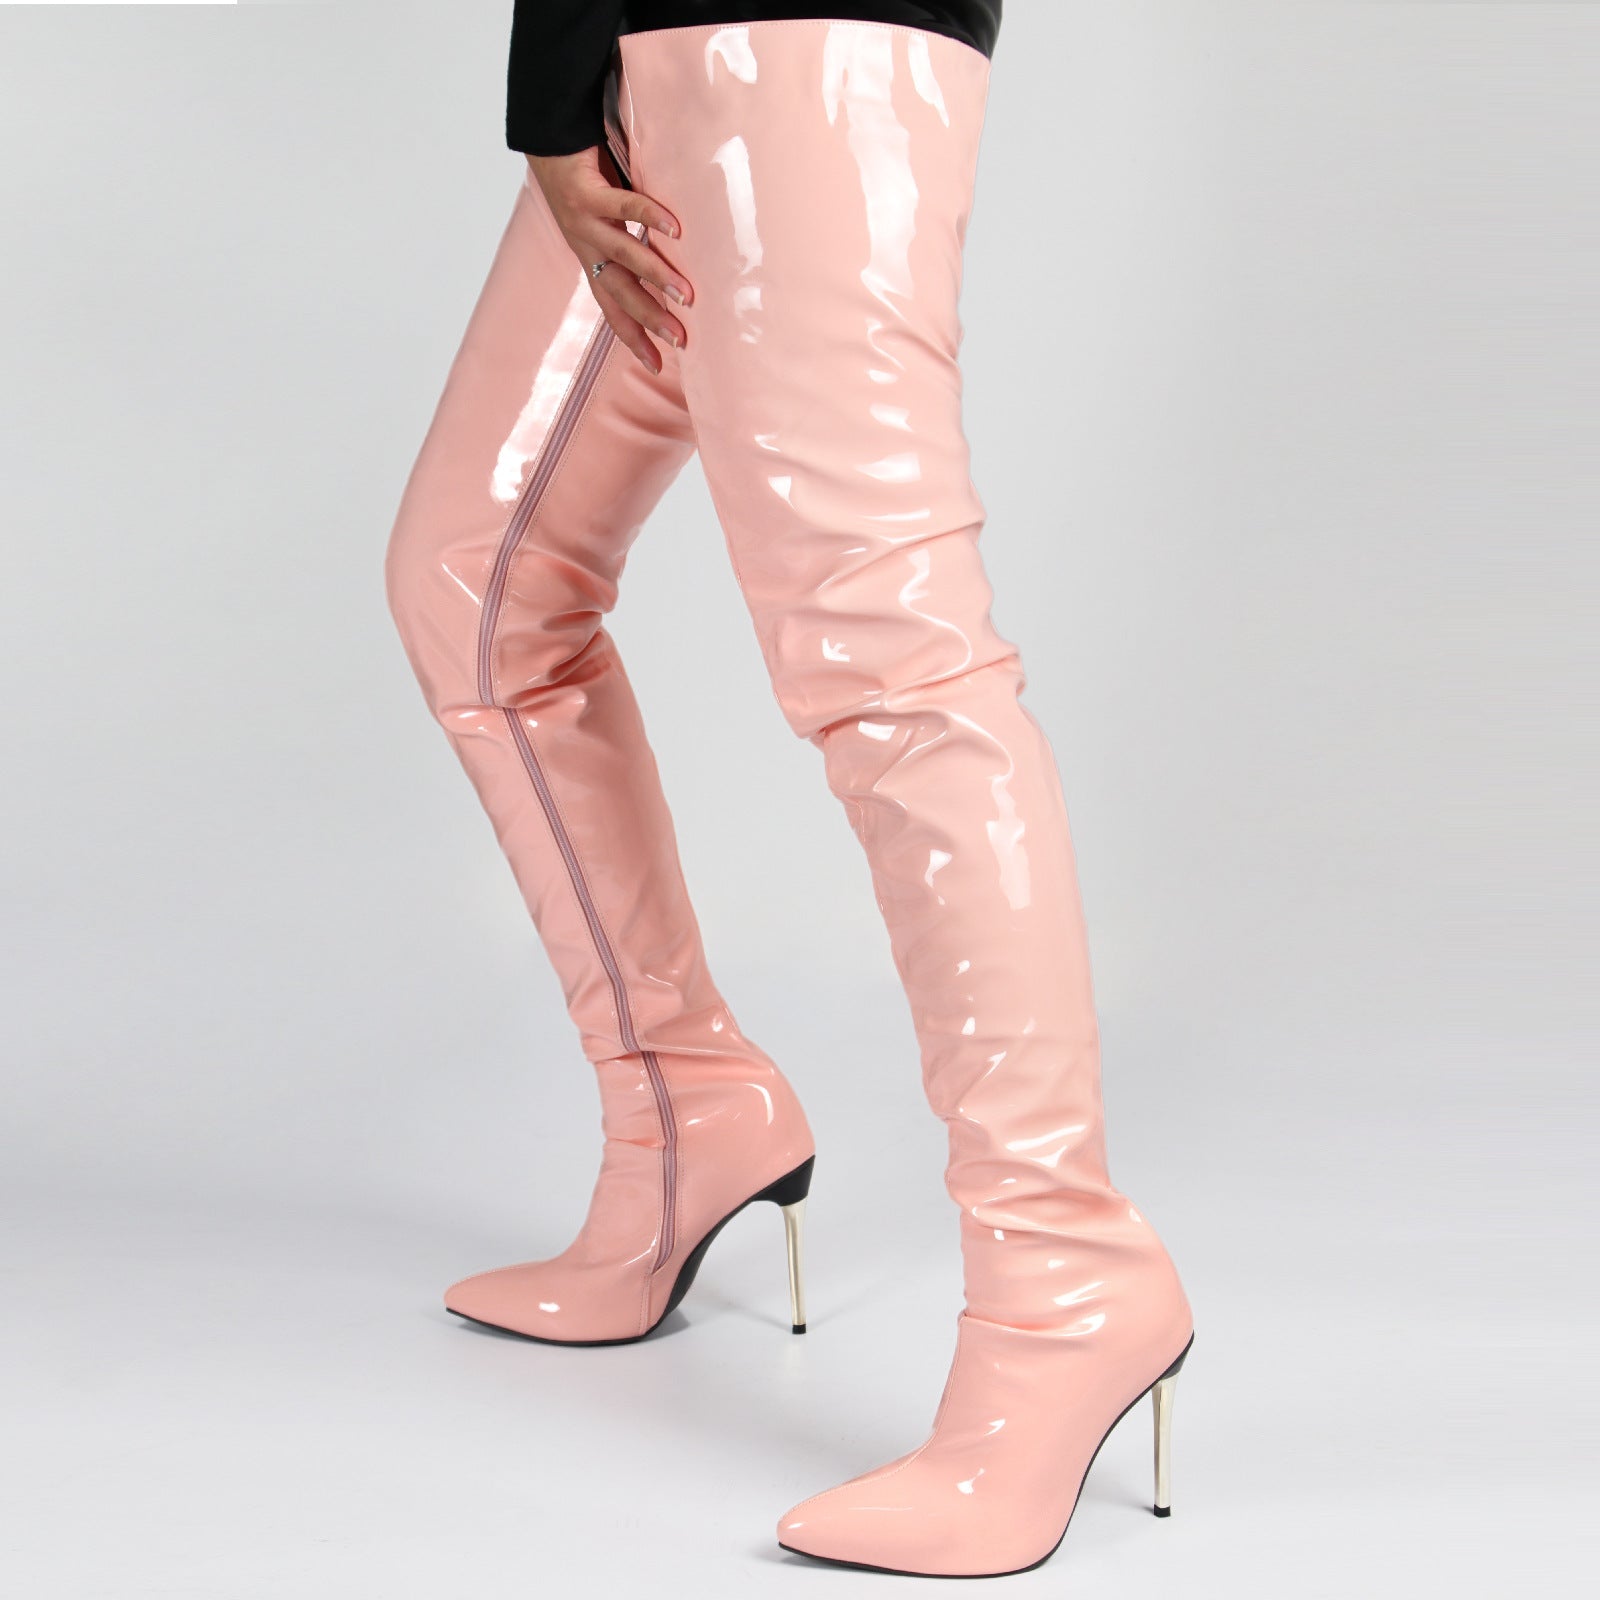 Women's PU patent leather stiletto heel thigh high boots sexy slimming over the knee boots